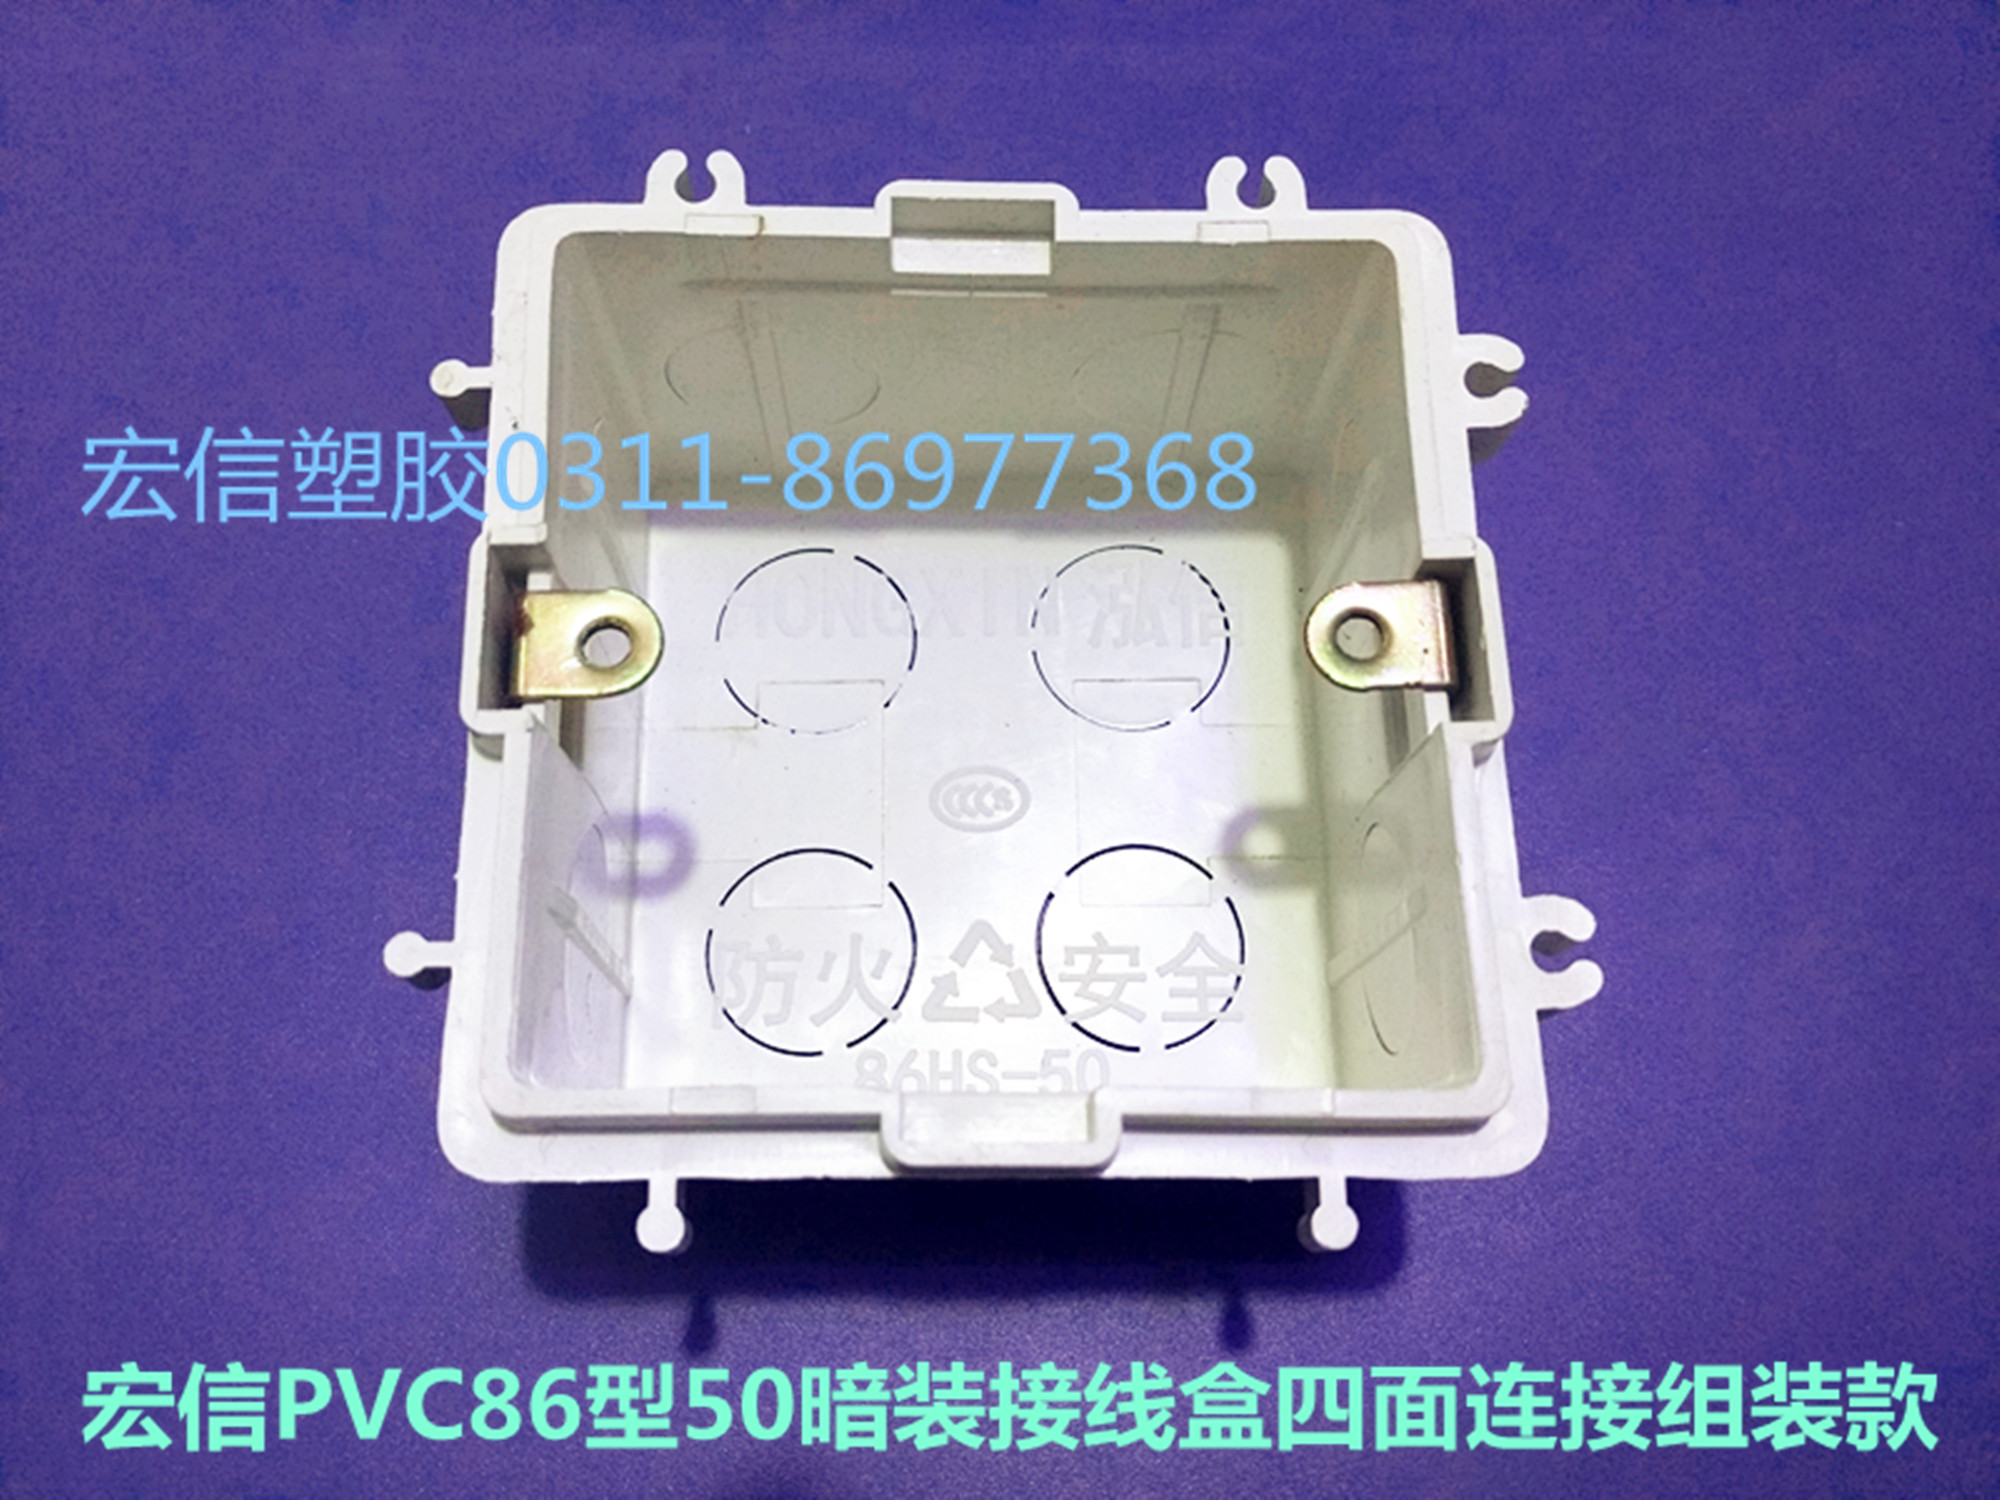 Flame-retardant pvc86 universal dark box engineering embedded four-sided connection can be spliced bottom box combination concealed junction box